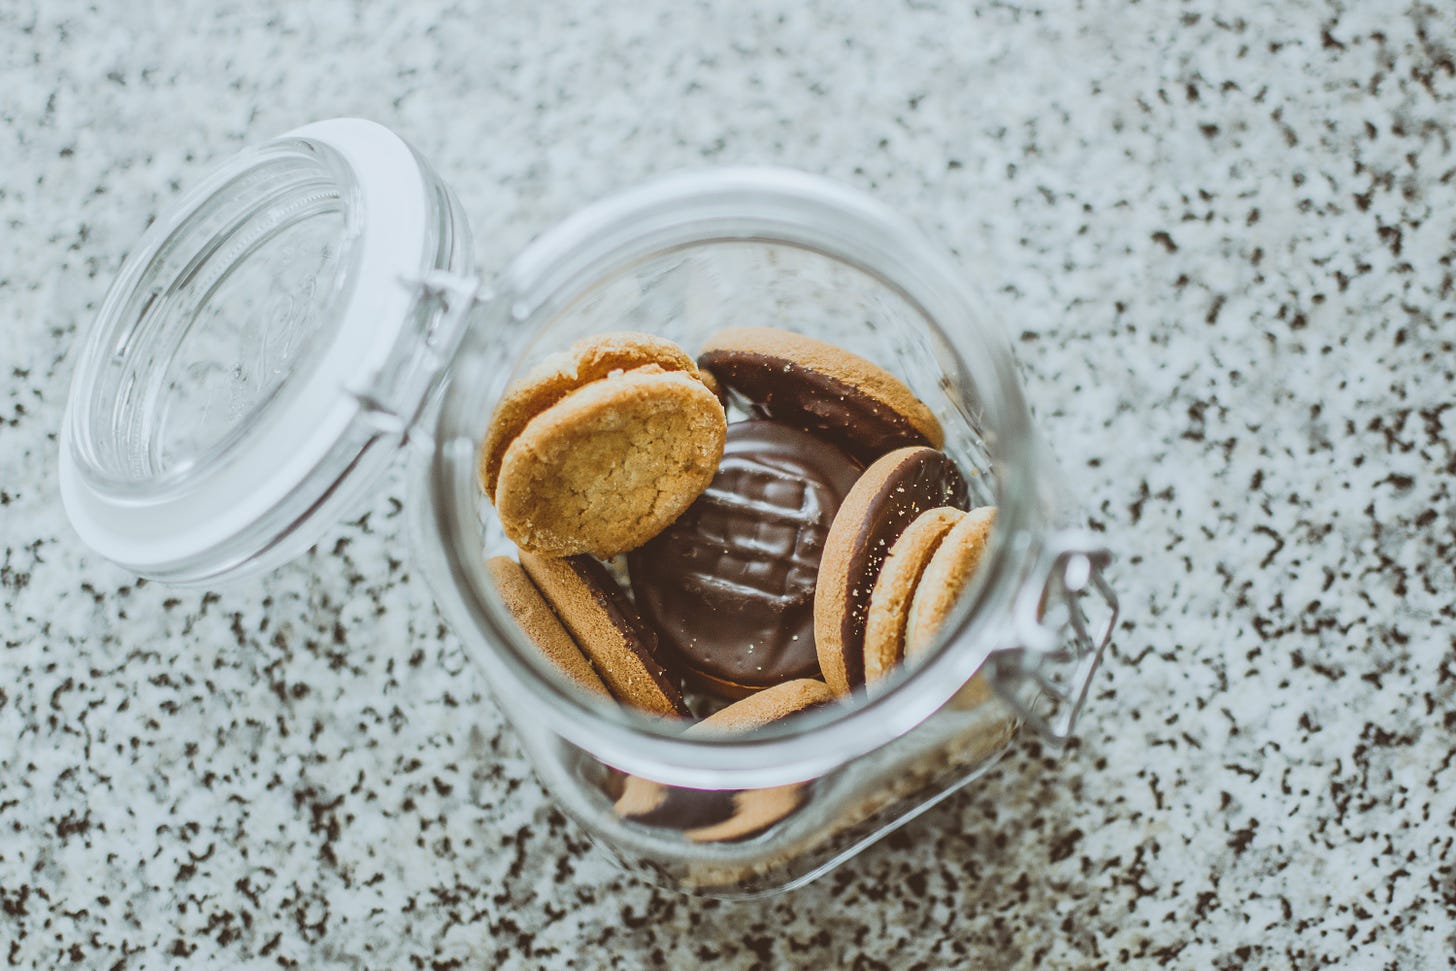 A clear glass cookie jar on a white and black table. The camera is looking down into the jar and inside are yellow cookies with chocolate in the middle.